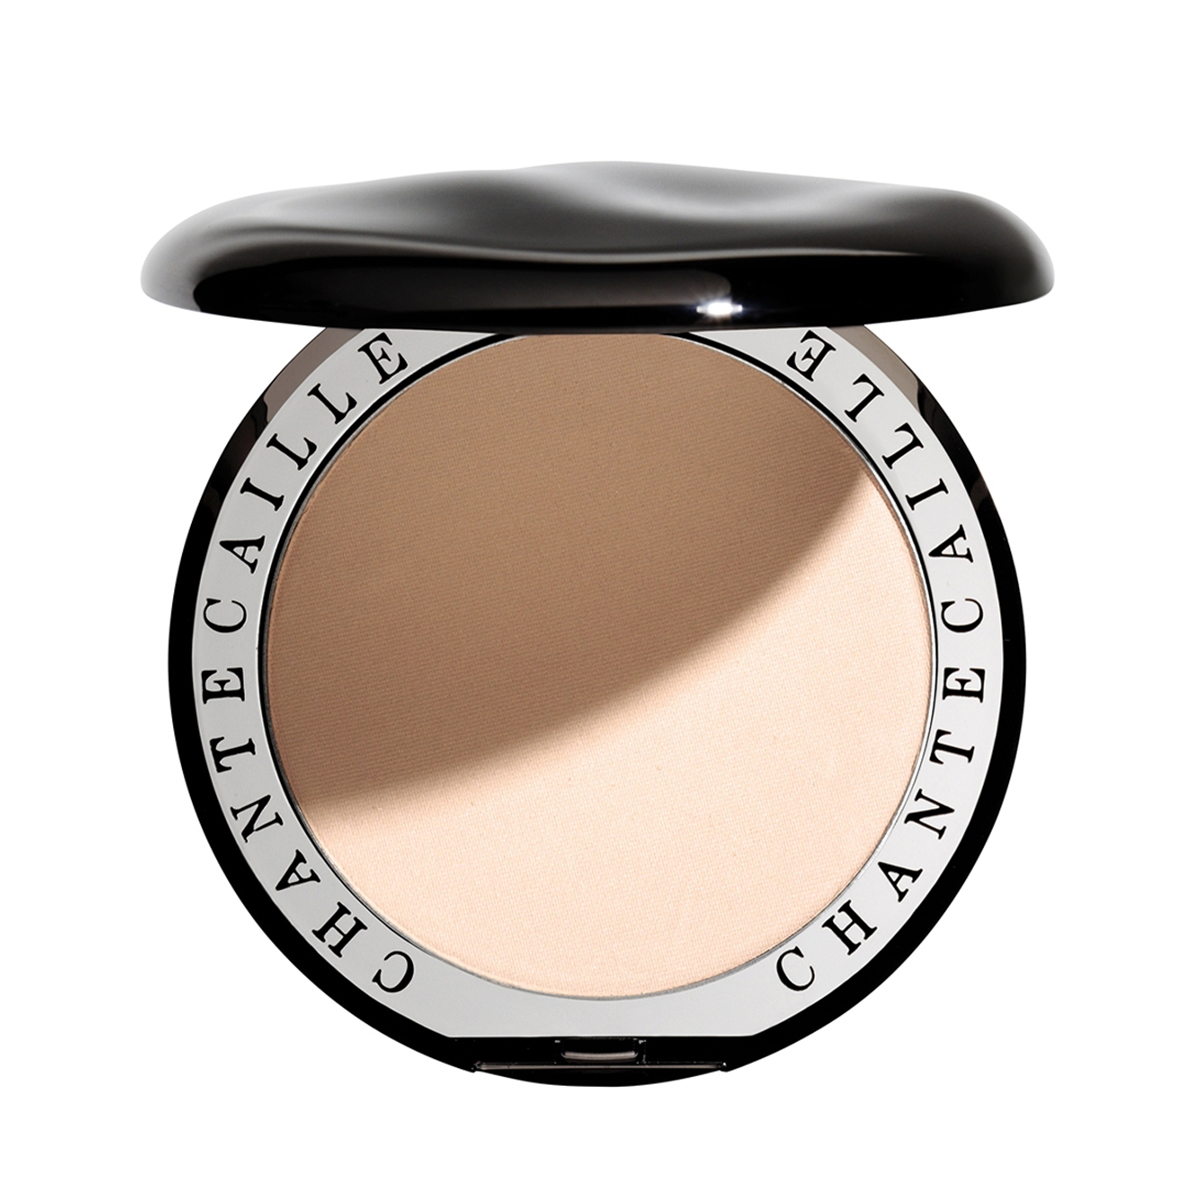 Best foundations for mature skin: Chantecaille HD Perfecting Powder